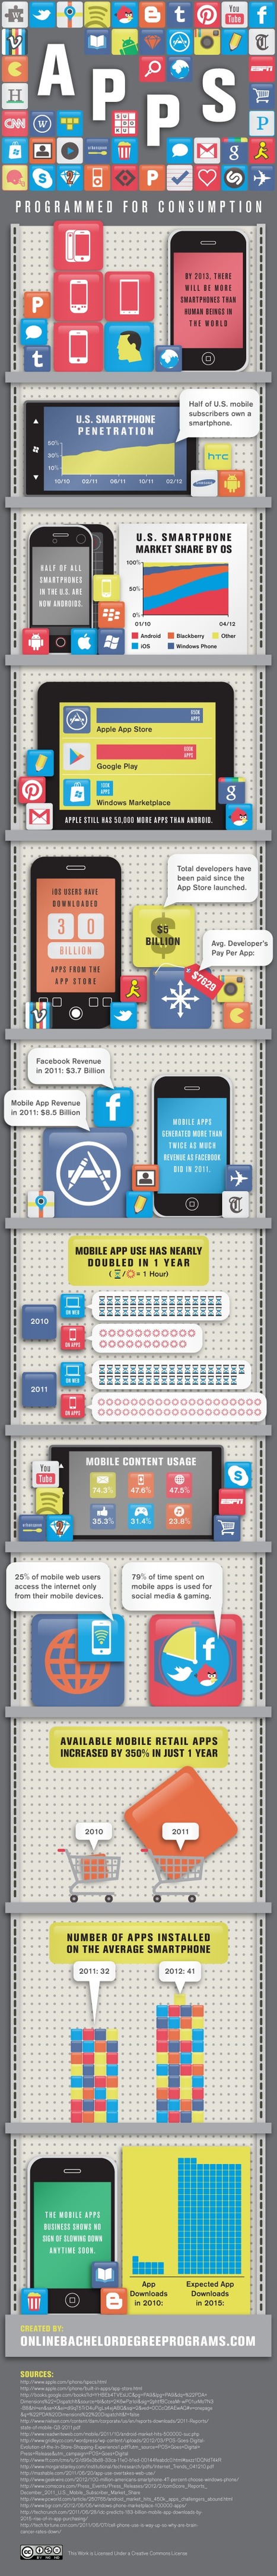 Mobile Web is Not COMING It’s HERE Just In Case You Haven’t Noticed [Infographic] | Al calor del Caribe | Scoop.it